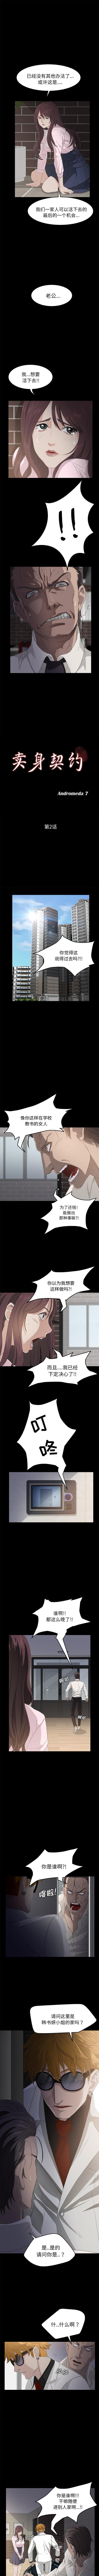 Shecock 賣身契約 1-51 Fucking - Page 10